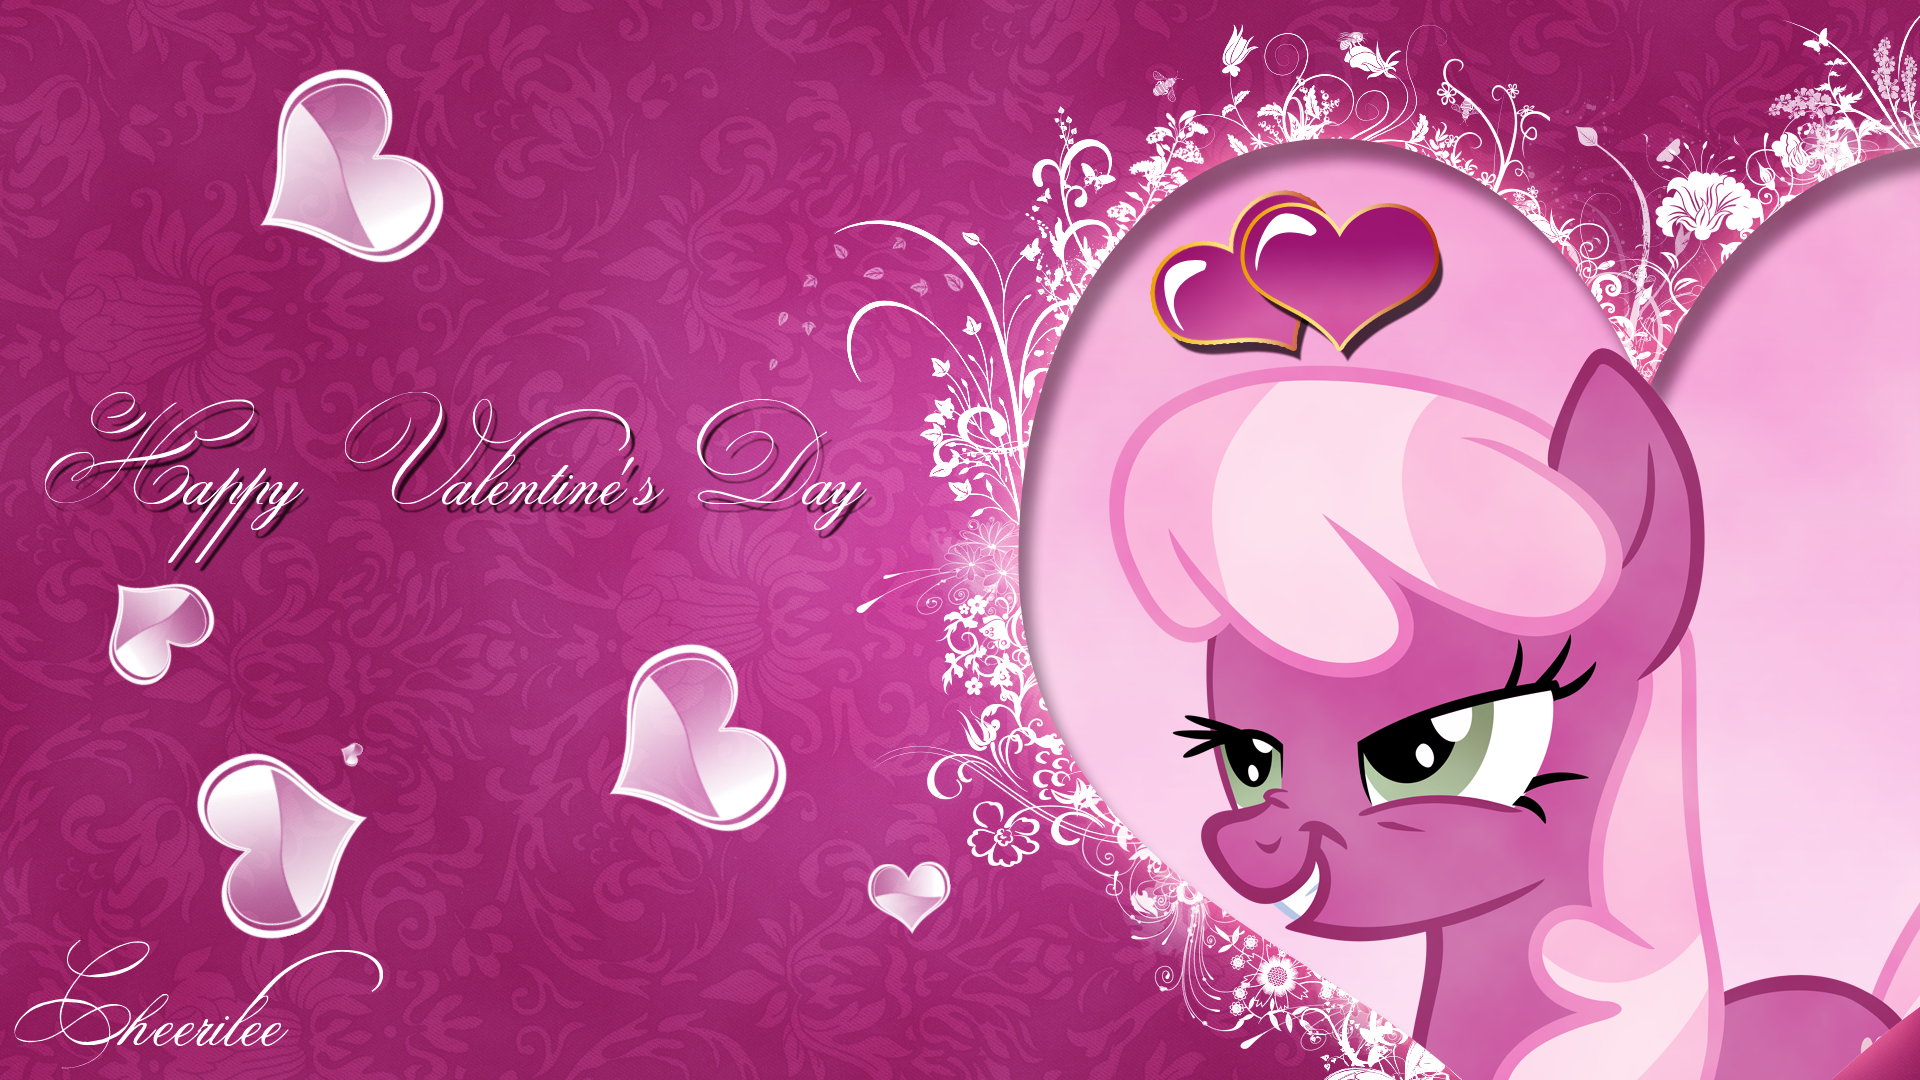 Happy Valentine's Day WP - With Cheerilee by Calumoninc and Mackaged